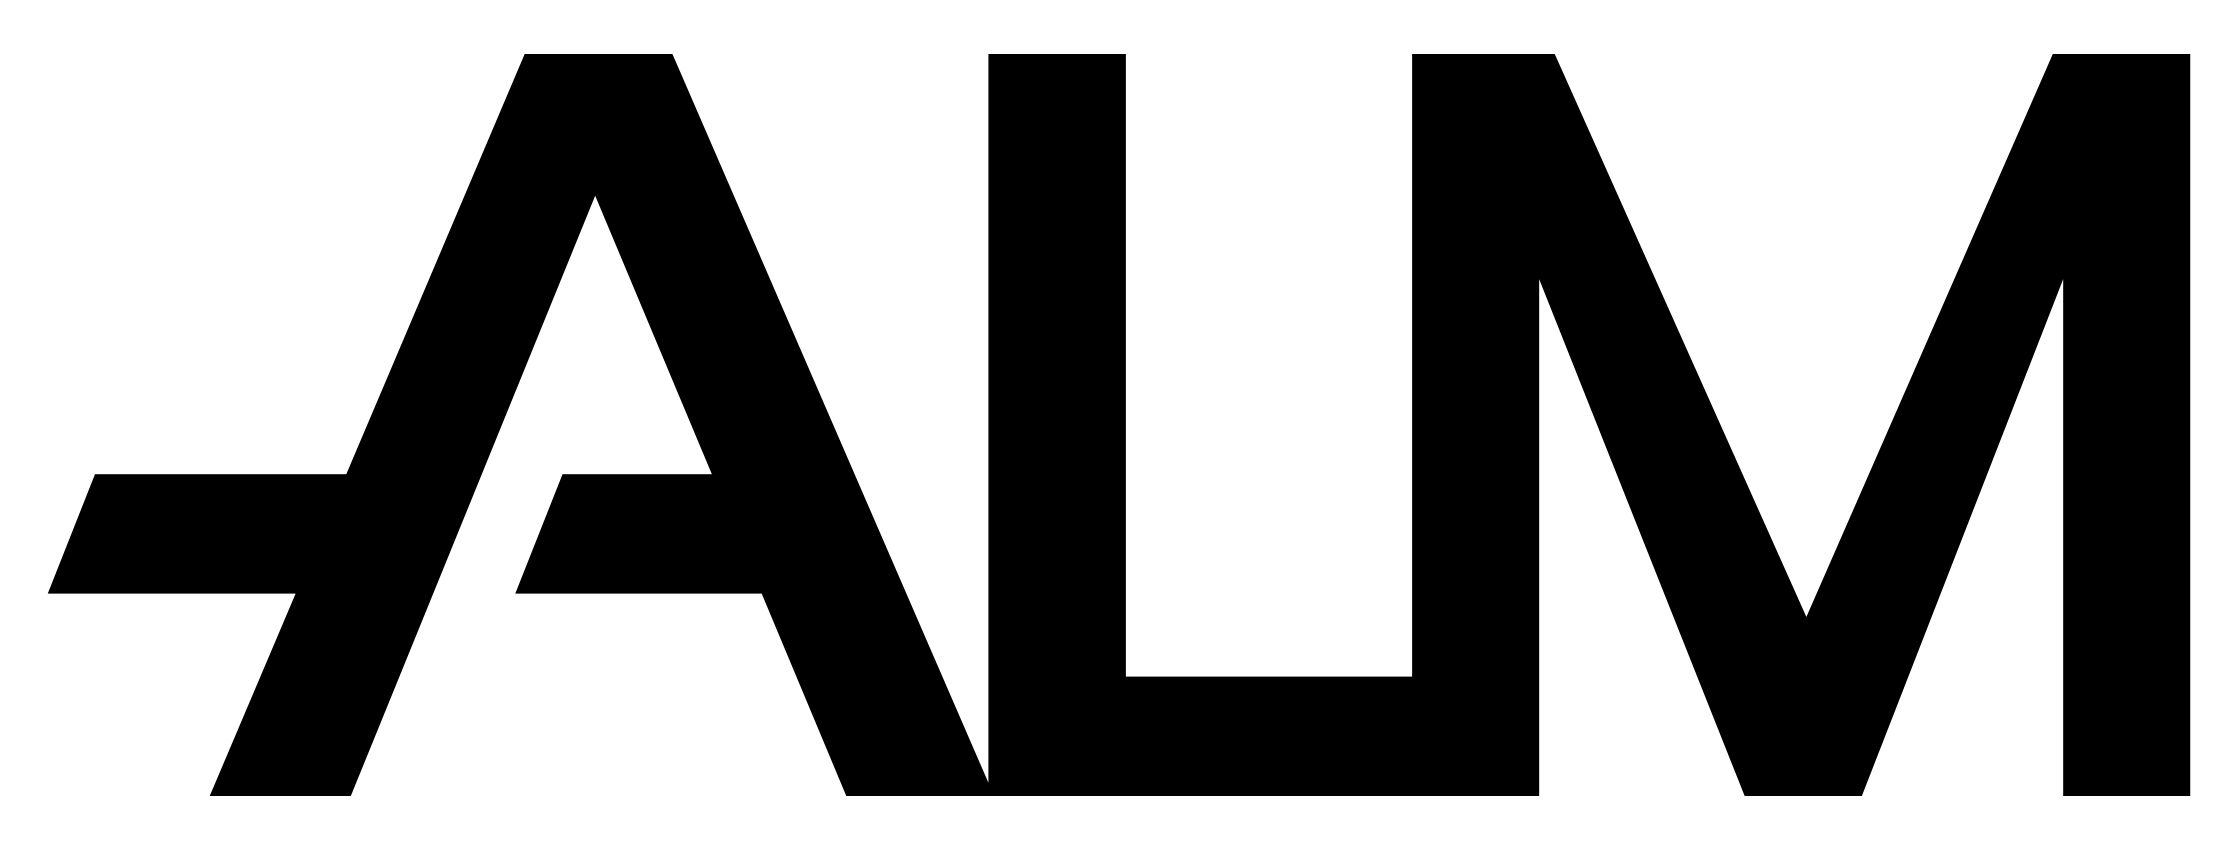 ALM Logo - ALM. What People Think